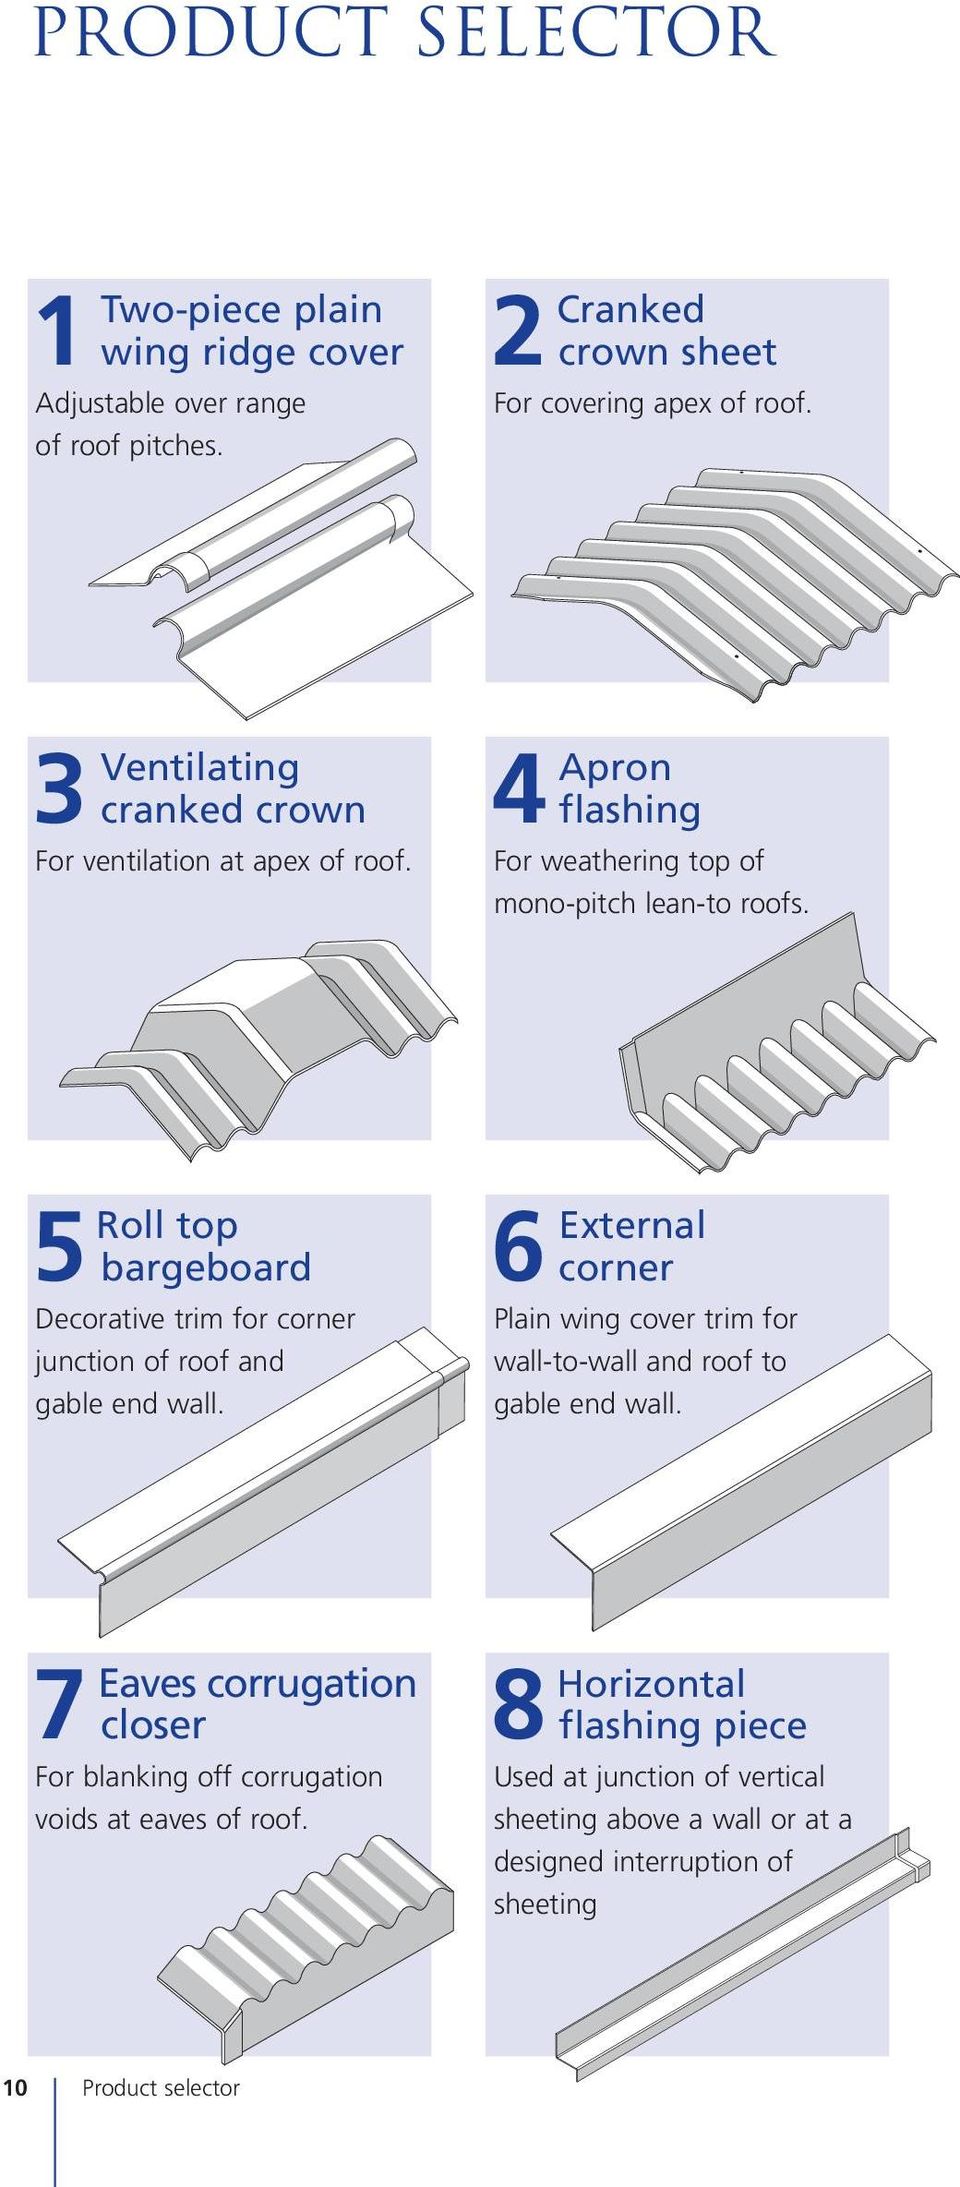 5 Roll top bargeboard Decorative trim for corner junction of roof and gable end wall.